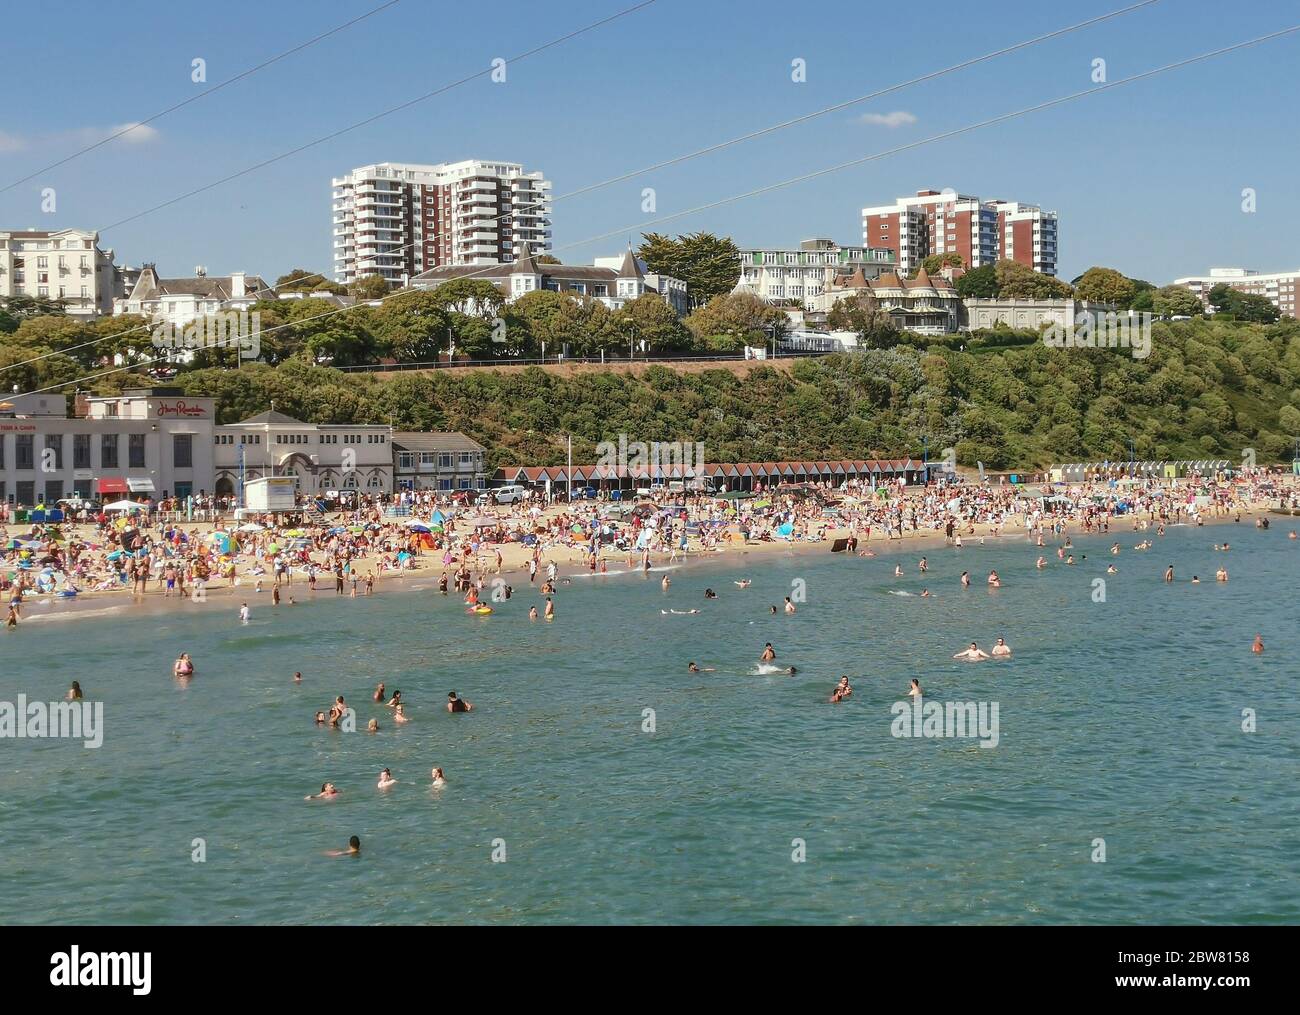 Bournemouth, UK. 30th May 2020. Bournemouth, UK.  Thousands of people descend on Bournemouth beach, many ignoring social distancing rules and crowding the beach and sea. Credit: Thomas Faull/Alamy Live News Stock Photo